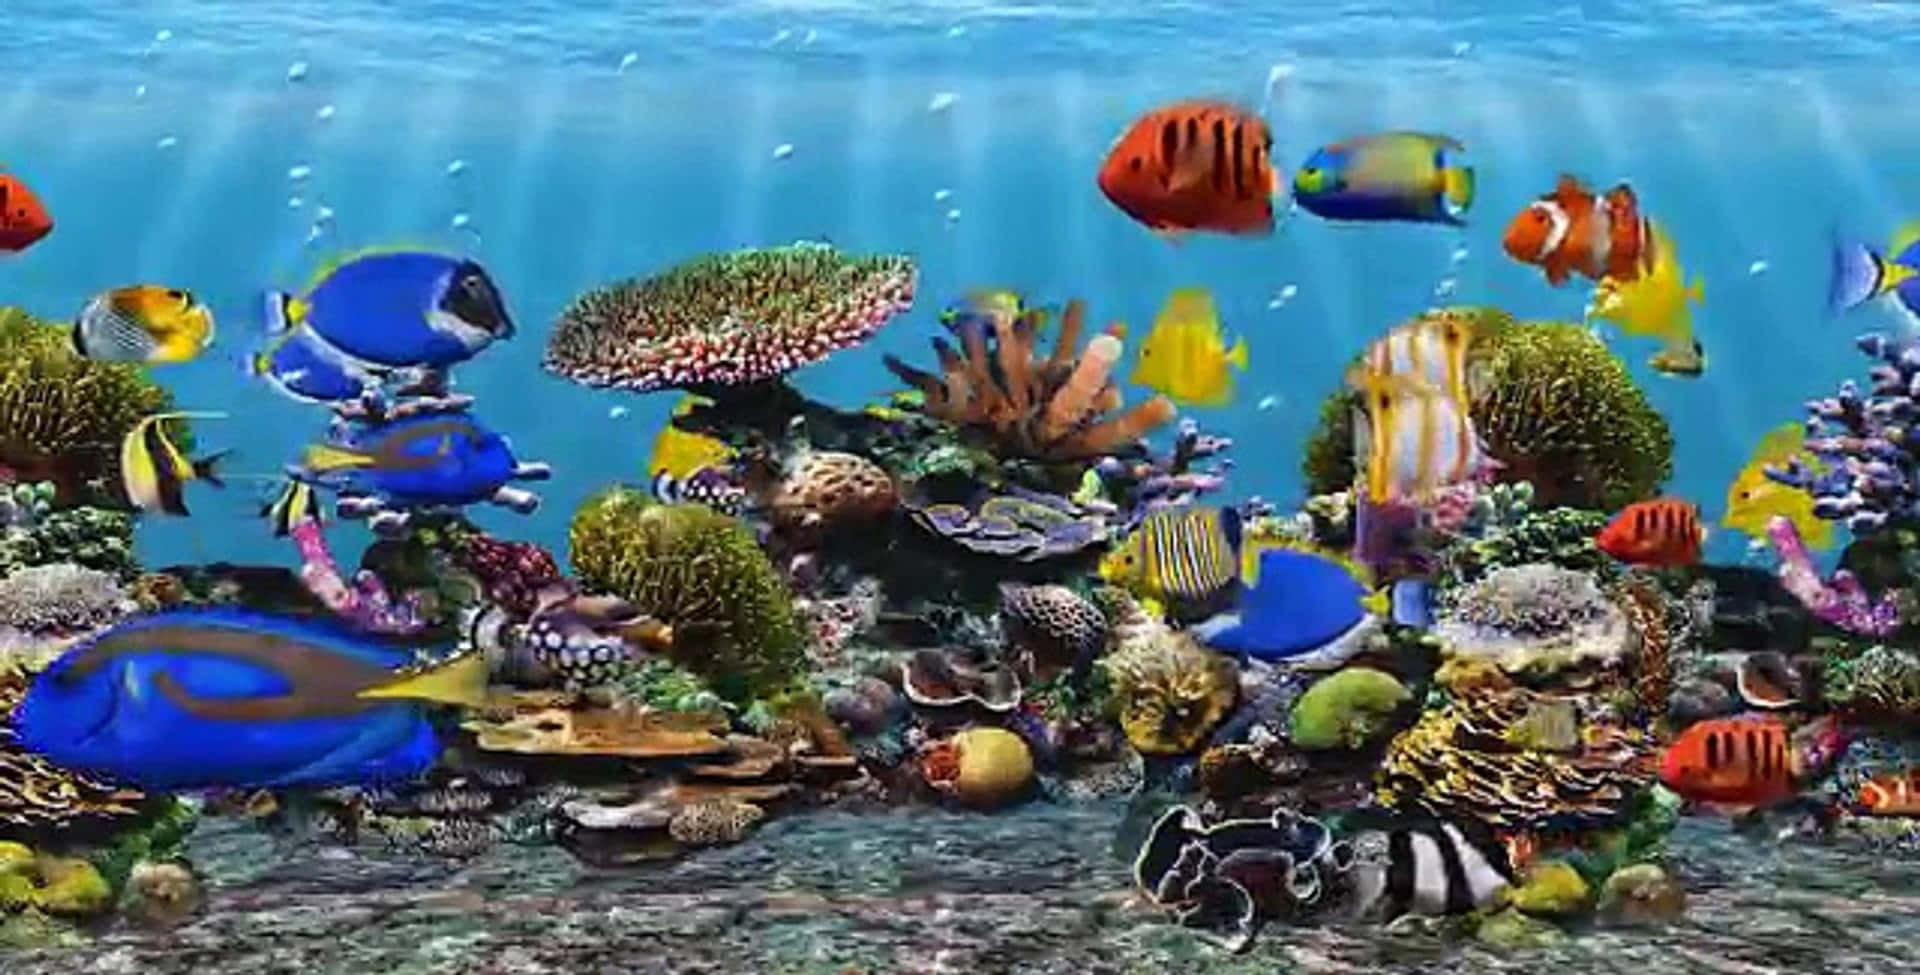 "A beautiful glimpse into a colorful underwater world" Wallpaper